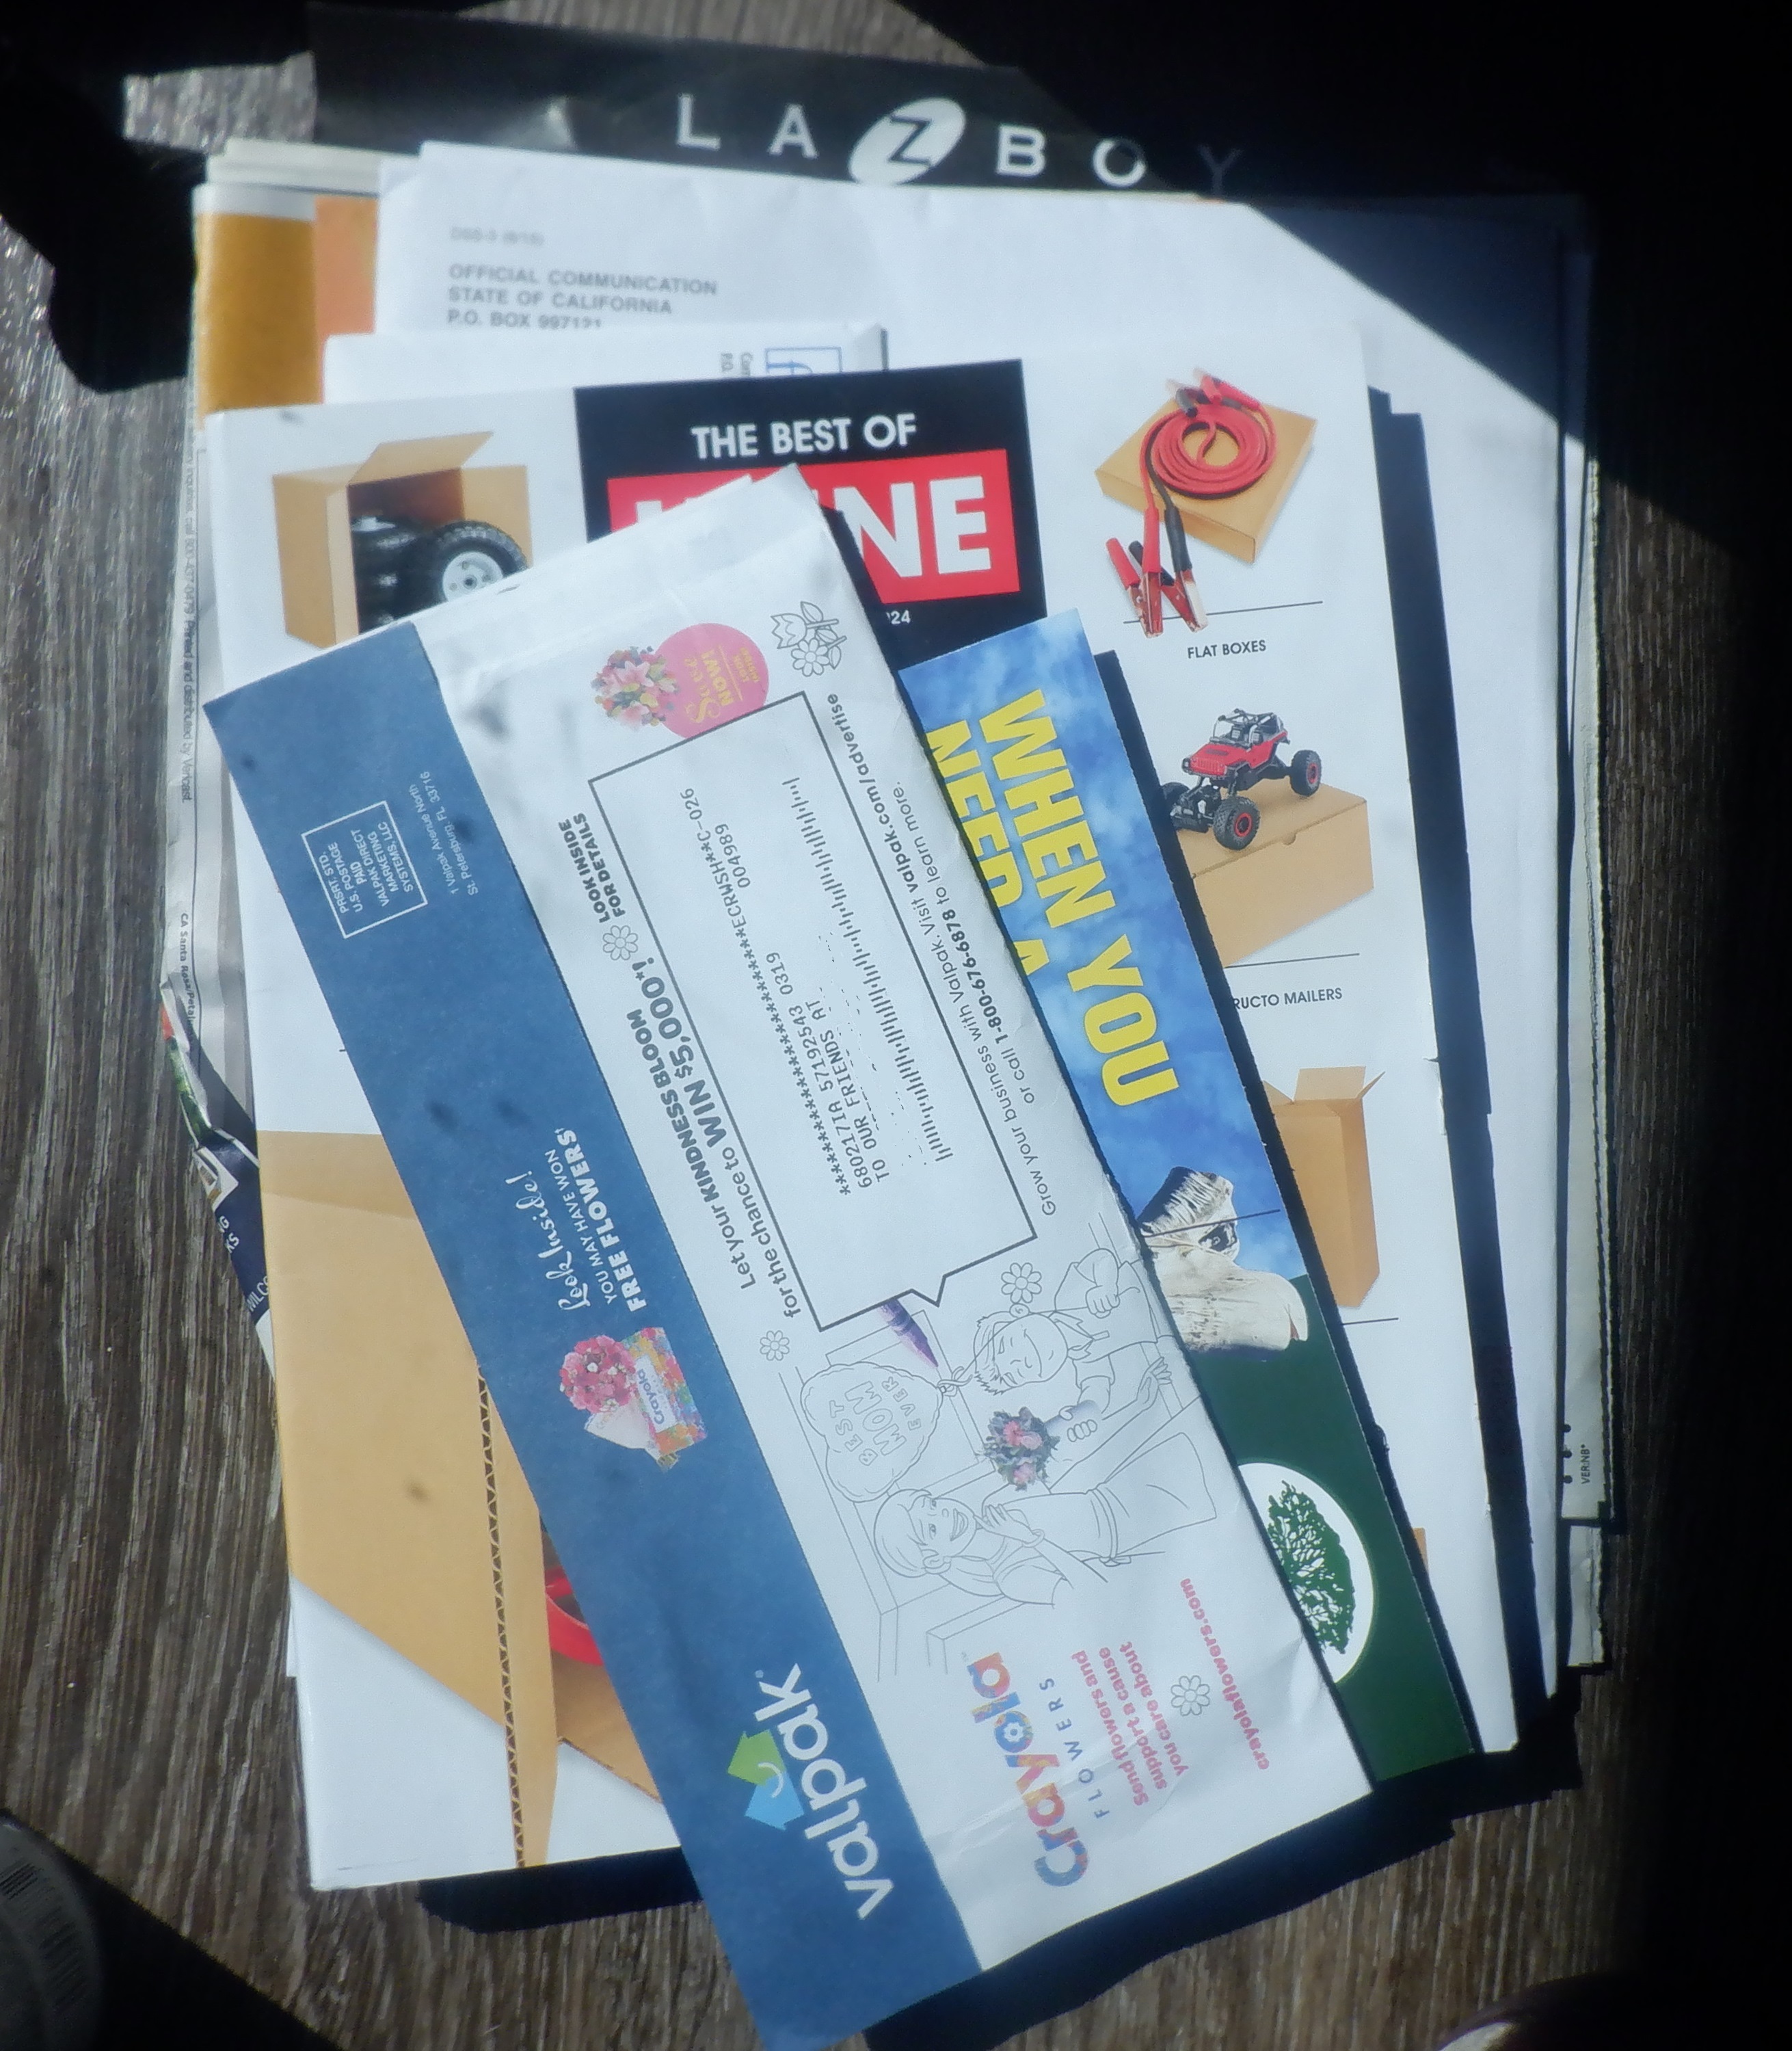 Photo I took of my exciting mail